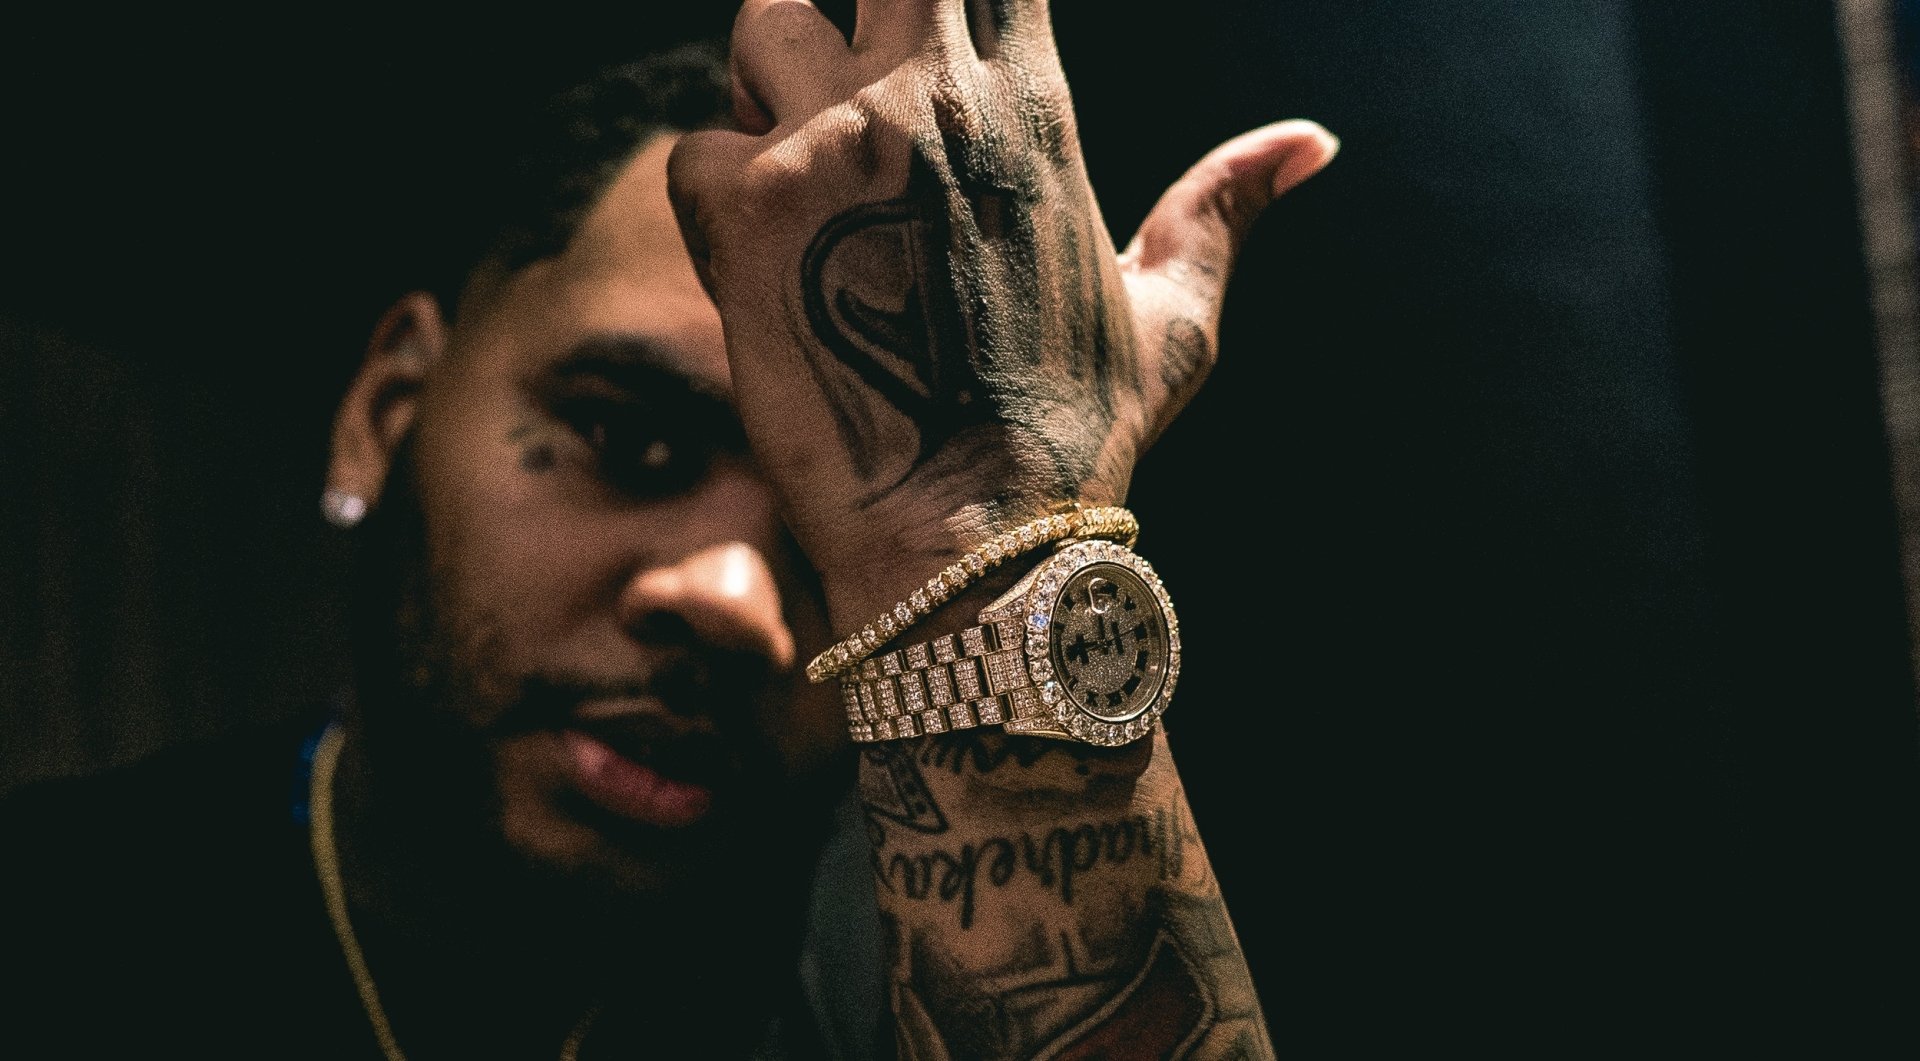 Kevin Gates Wallpaper Made by aaliyah  Kevin gates wallpaper Kevin  gates Celebrity wallpapers